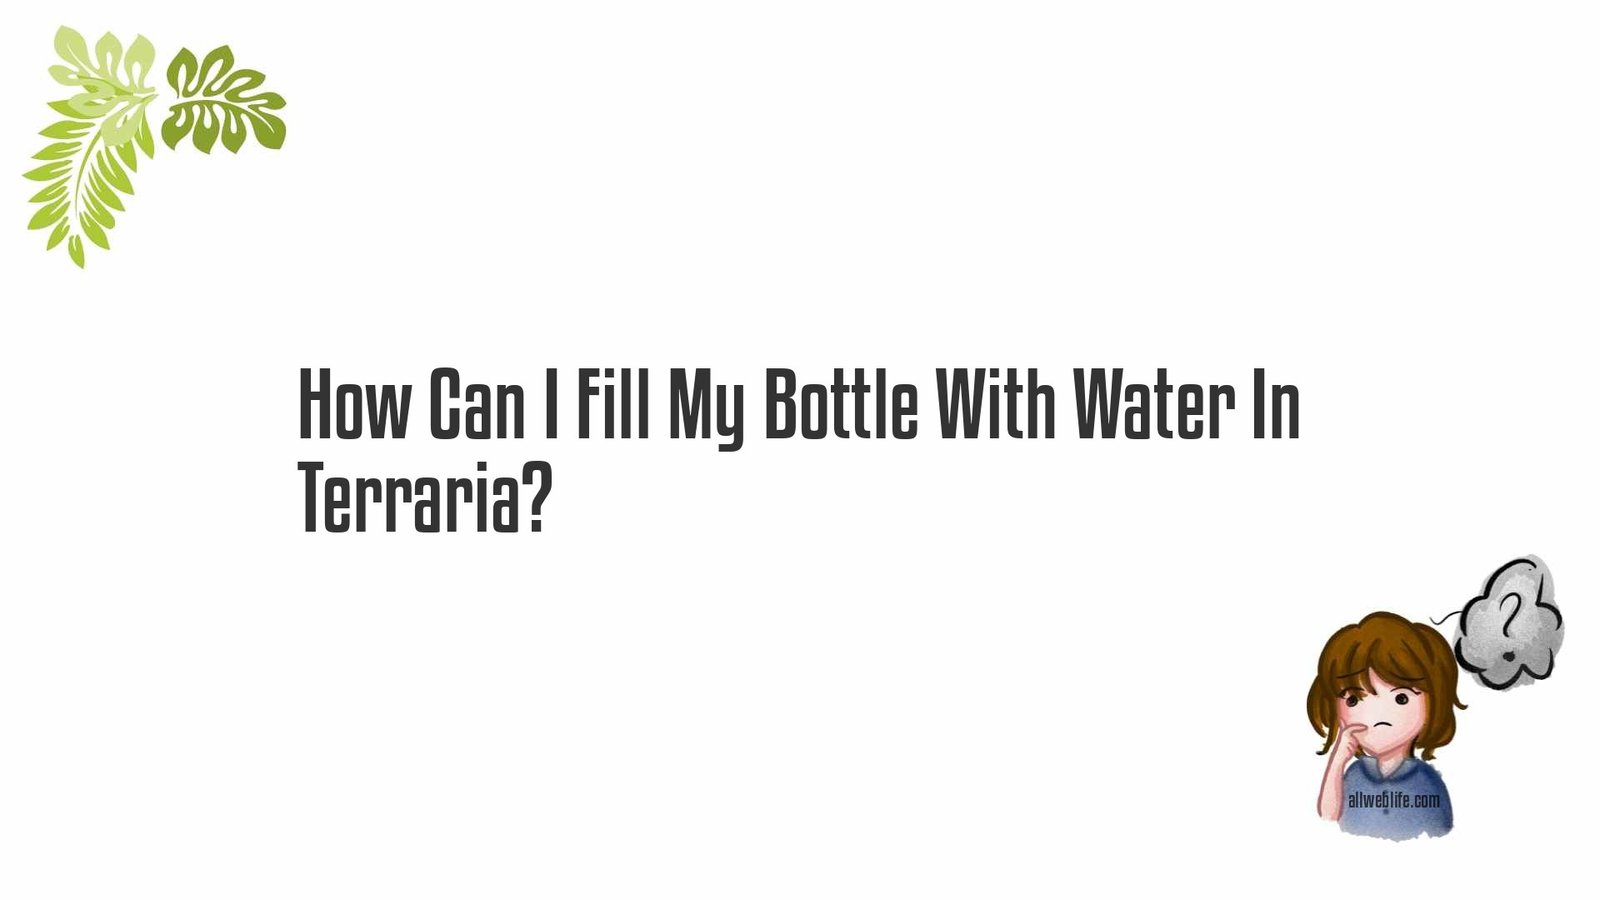 How Can I Fill My Bottle With Water In Terraria?